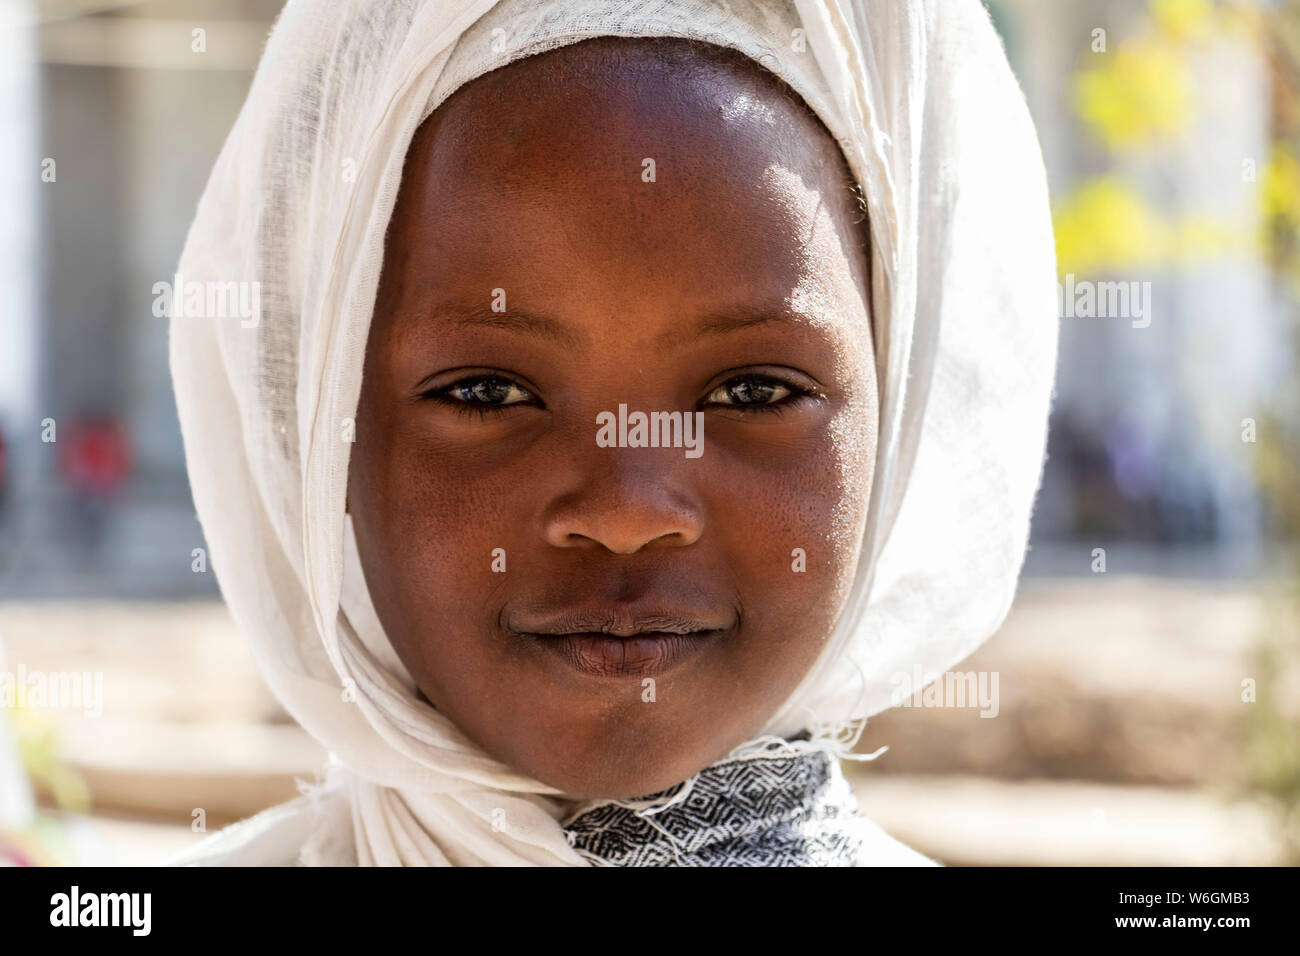 Portrait of a young Ethiopian girl at the Church of Saint George during Timkat, the Orthodox Tewahedo celebration of Epiphany, celebrated on Januar... Stock Photo